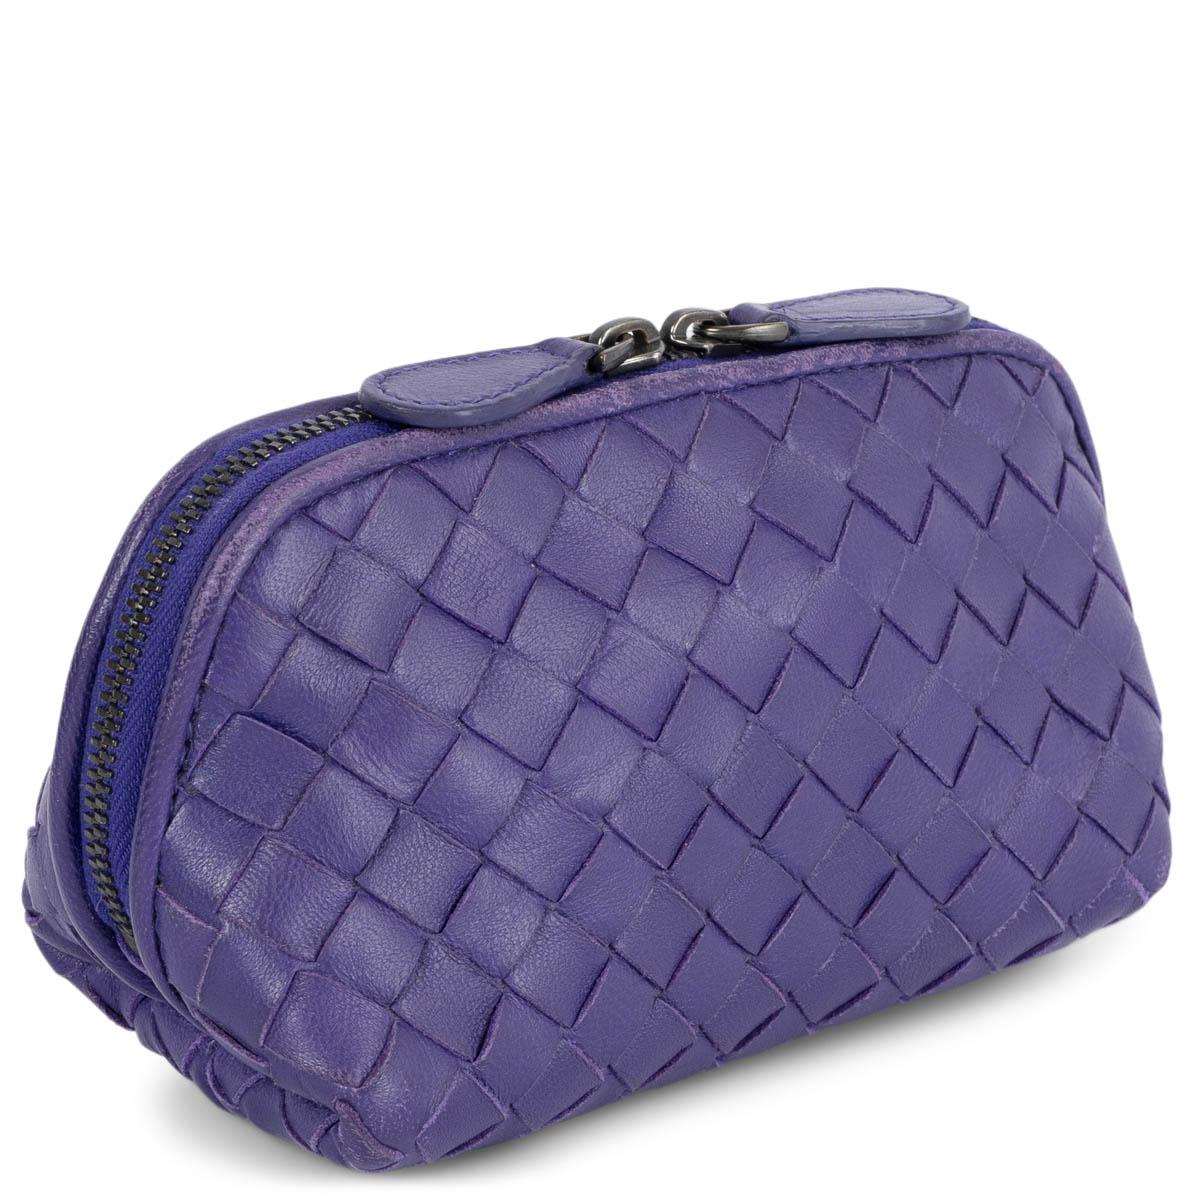 100% authentic Bottega Veneta Intrecciato mini pouch in purple smooth nappa leather. Opens with a zipper on top and is lined brown canvas. Has been carried and shows some soft wear to the piping. Overall in very good condition.